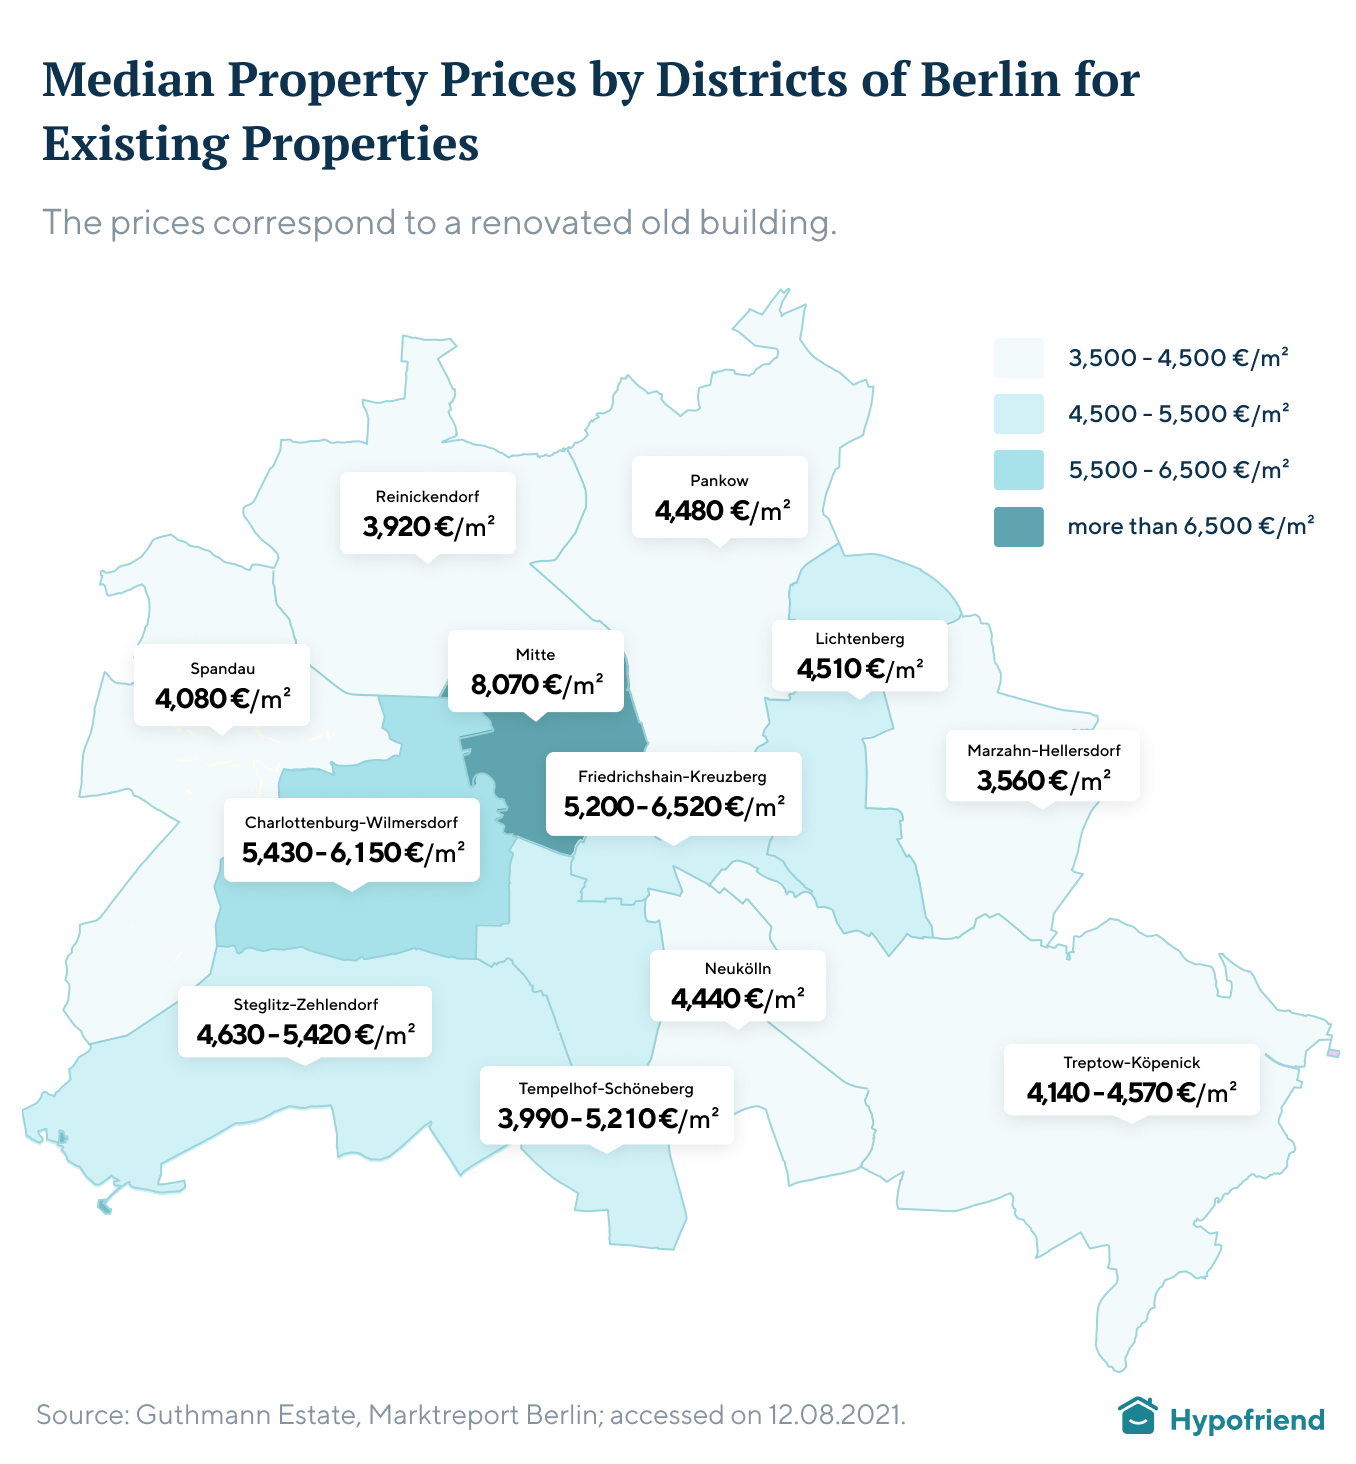 Median Property Prices by Districts of Berlin for Existing Properties